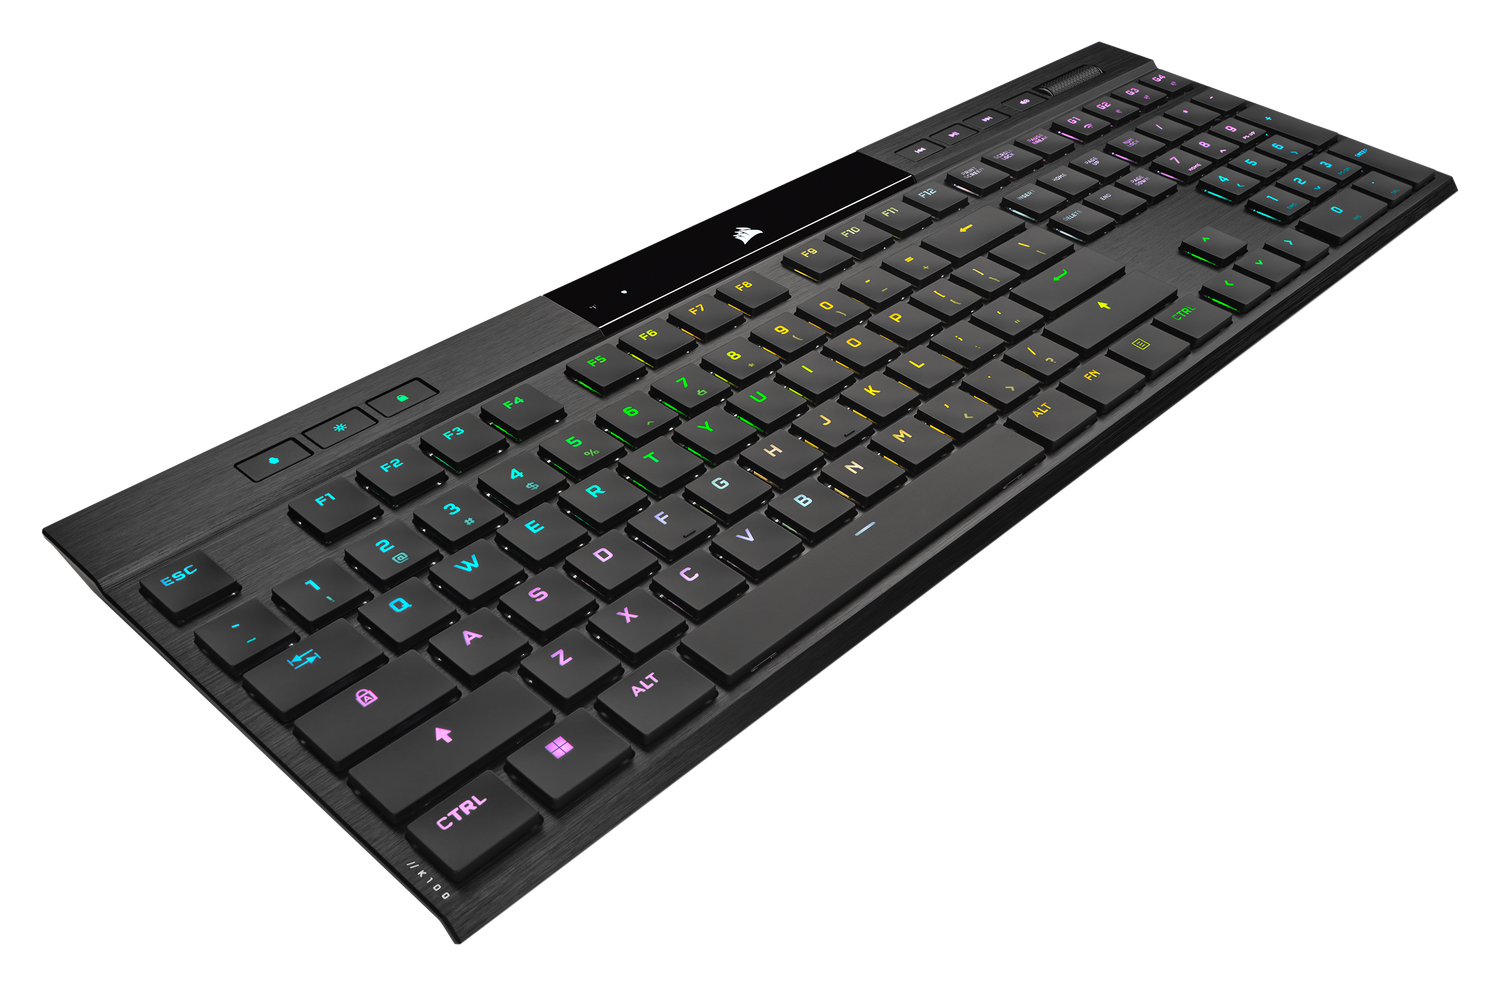 CORSAIR K100 AIR WIRELESS RGB ULTRA-THIN MECHANICAL, negru  Full Key (NKRO) with 100% Anti-Ghosting Supported in iCUE Profiles up to 50 Wired Connectivity USB 3.0 or 3.1 Type-A Key Switches CHERRY MX ULTRA LP TACTILE Autonomie baterie de pana la 50 de ore cu RGB/ 200 fara RGB